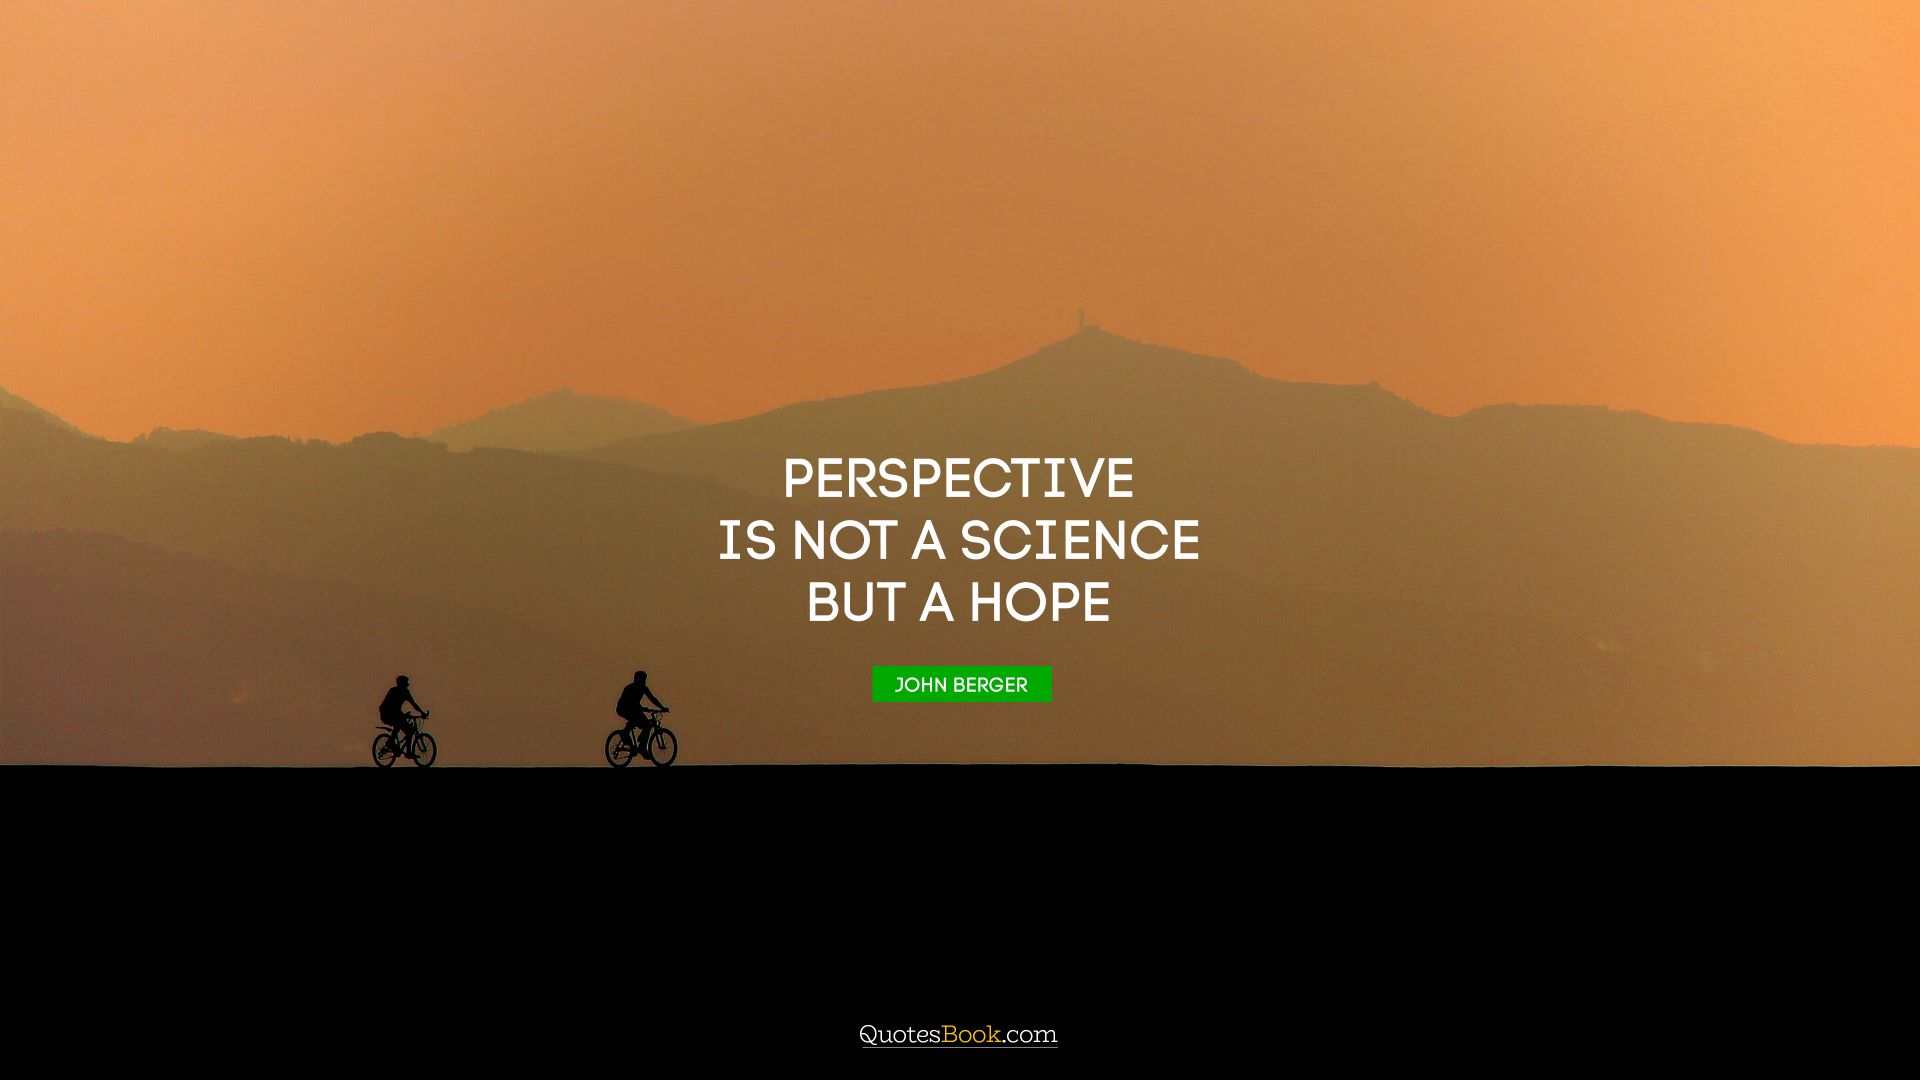 Perspective is not a science but a hope. - Quote by John Berger